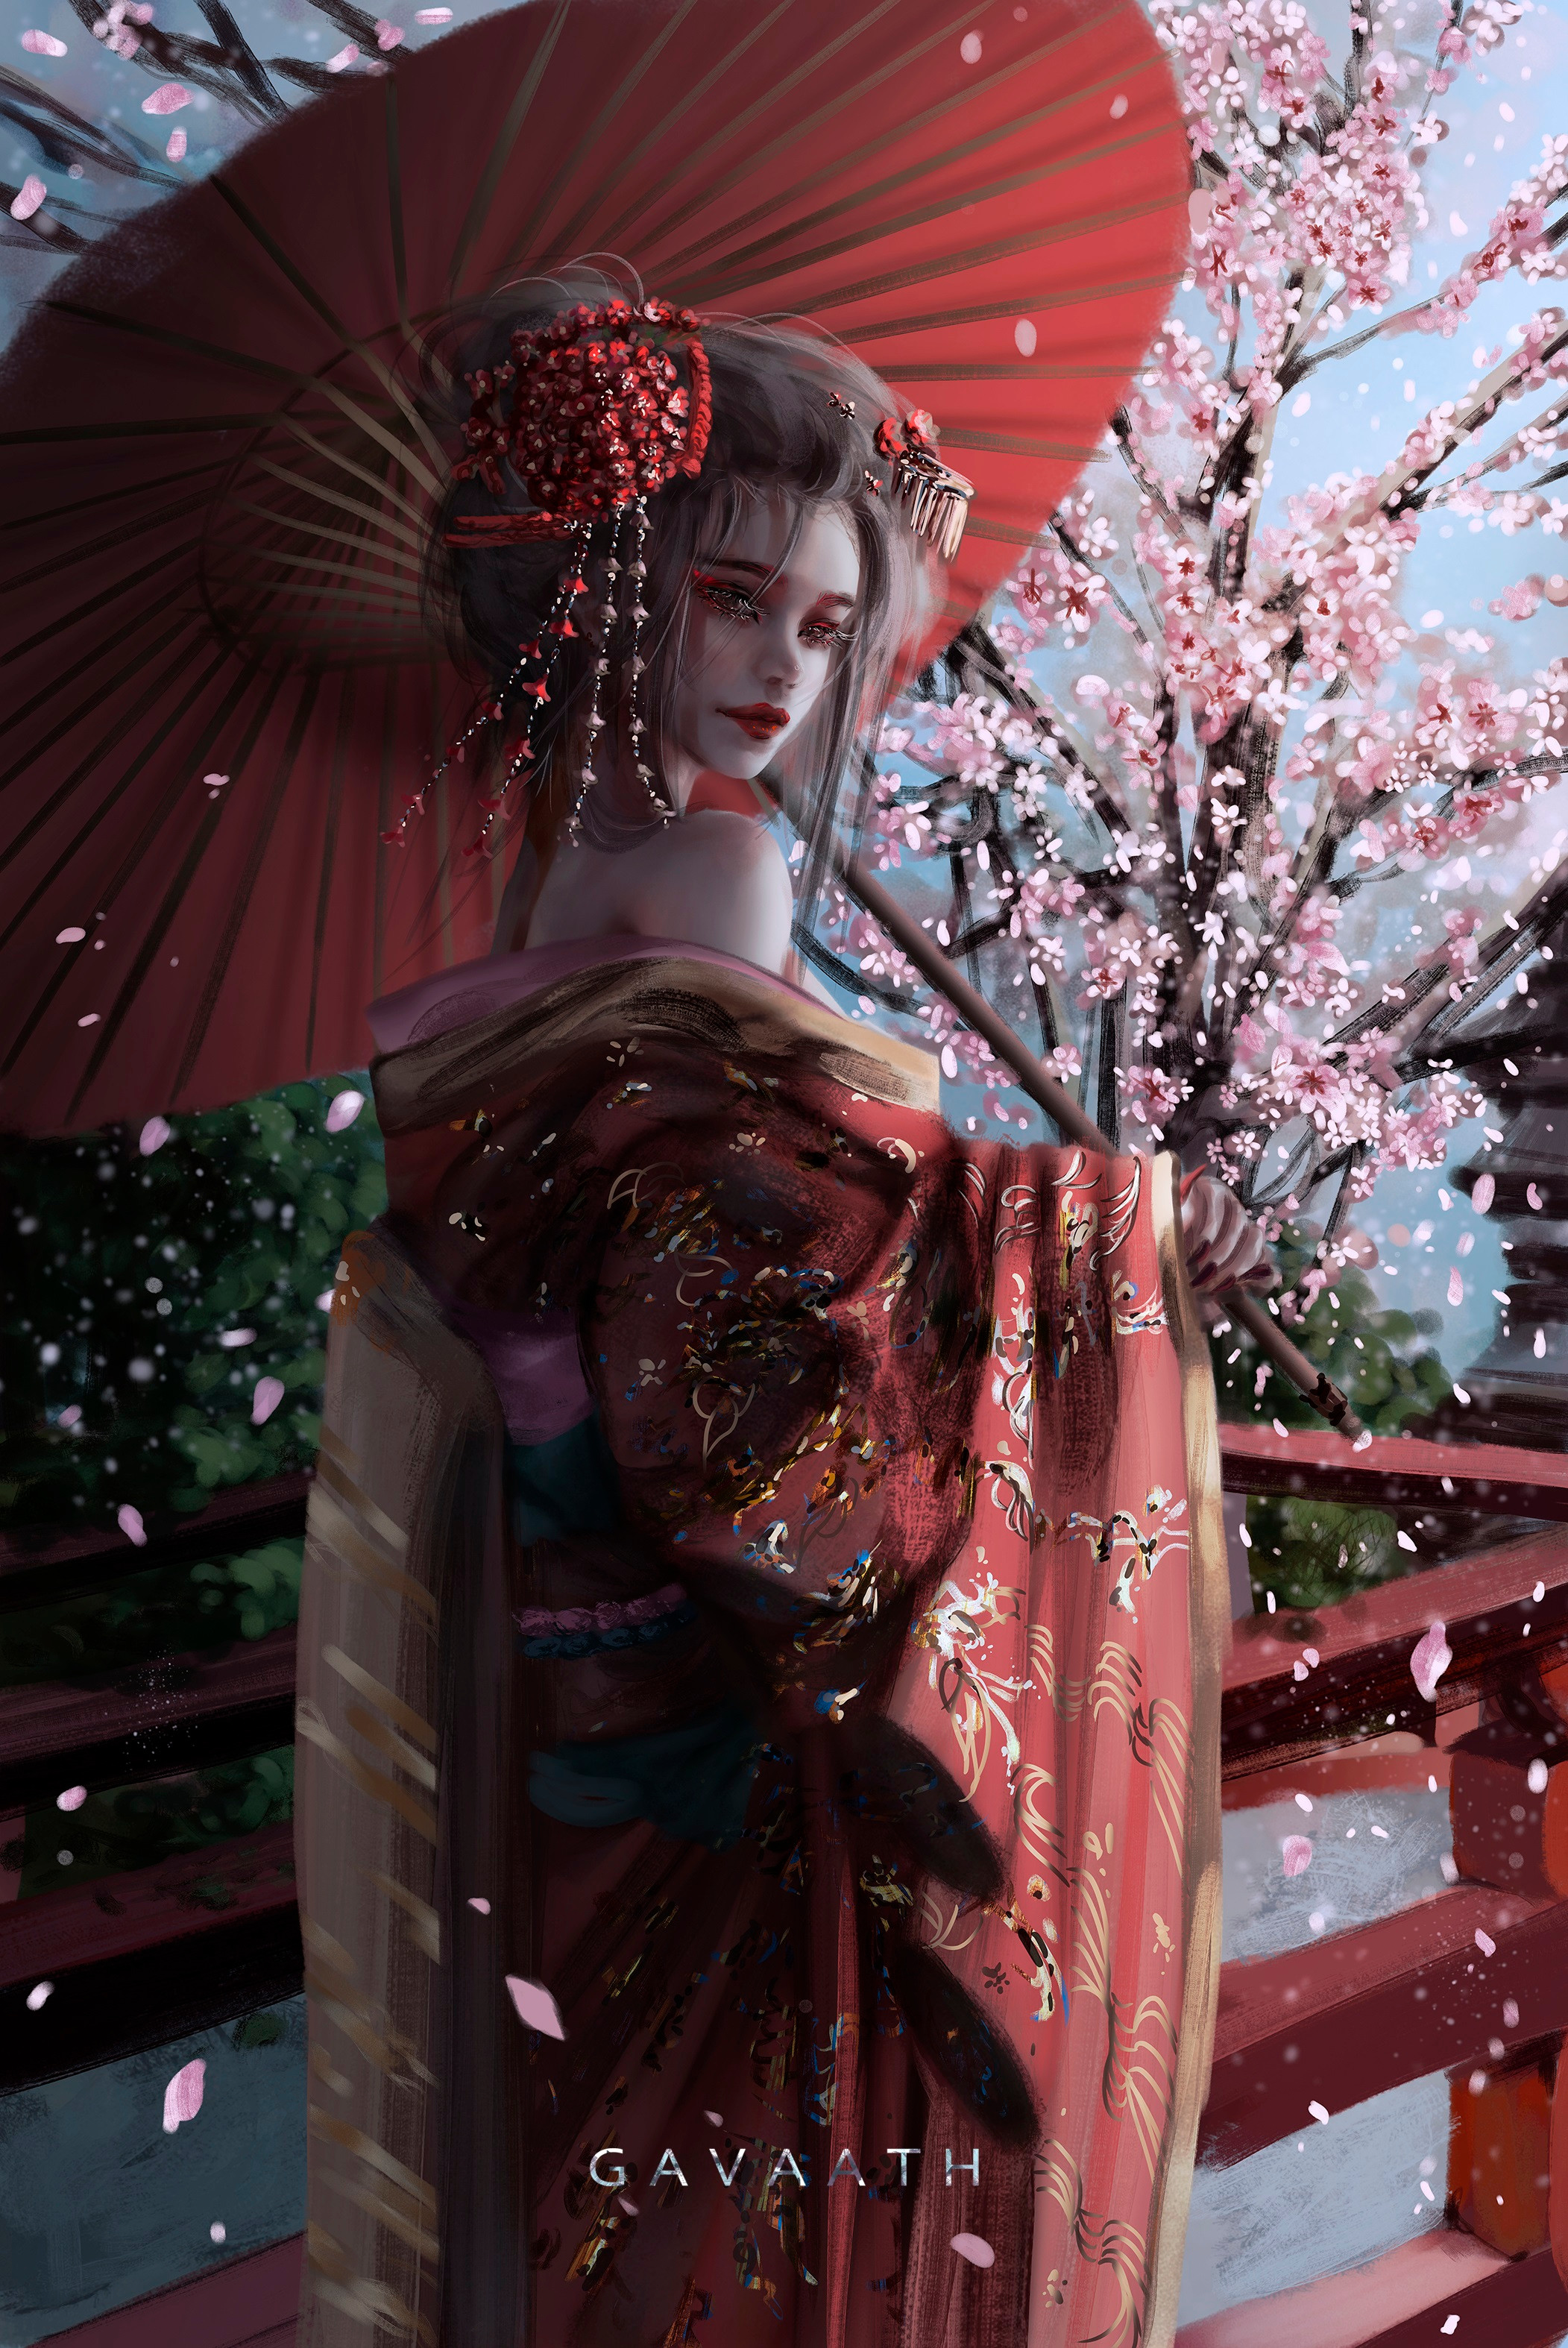 Gavaath Artist Dress Chinese Dress Women Chinese Clothing Leaves Pink Leaves Looking Back Red Umbrel 2103x3149